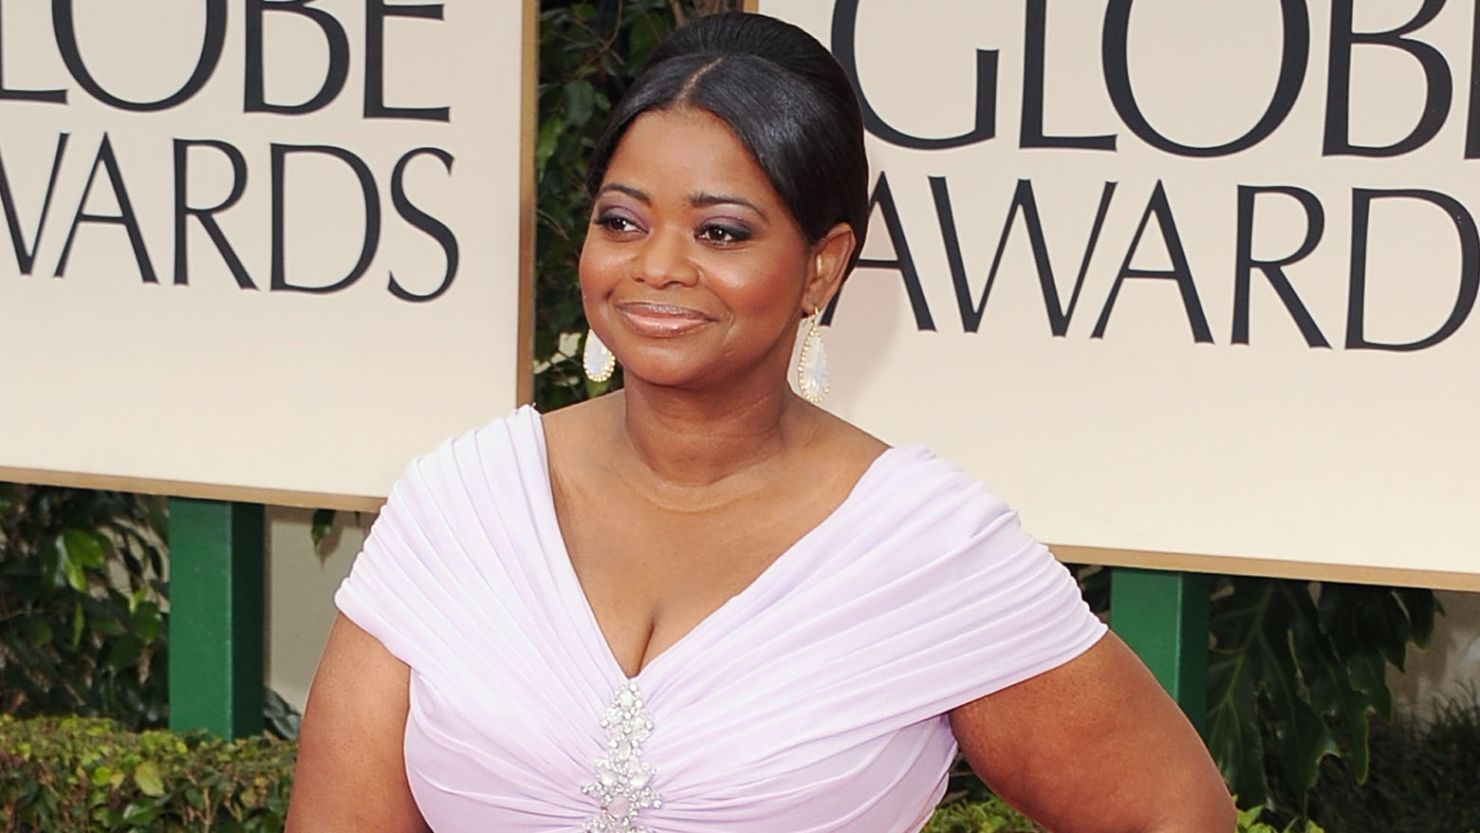 The award for best supporting actress in a film went to Octavia Spencer who played a maid in the Civil Rights era movie "The Help."